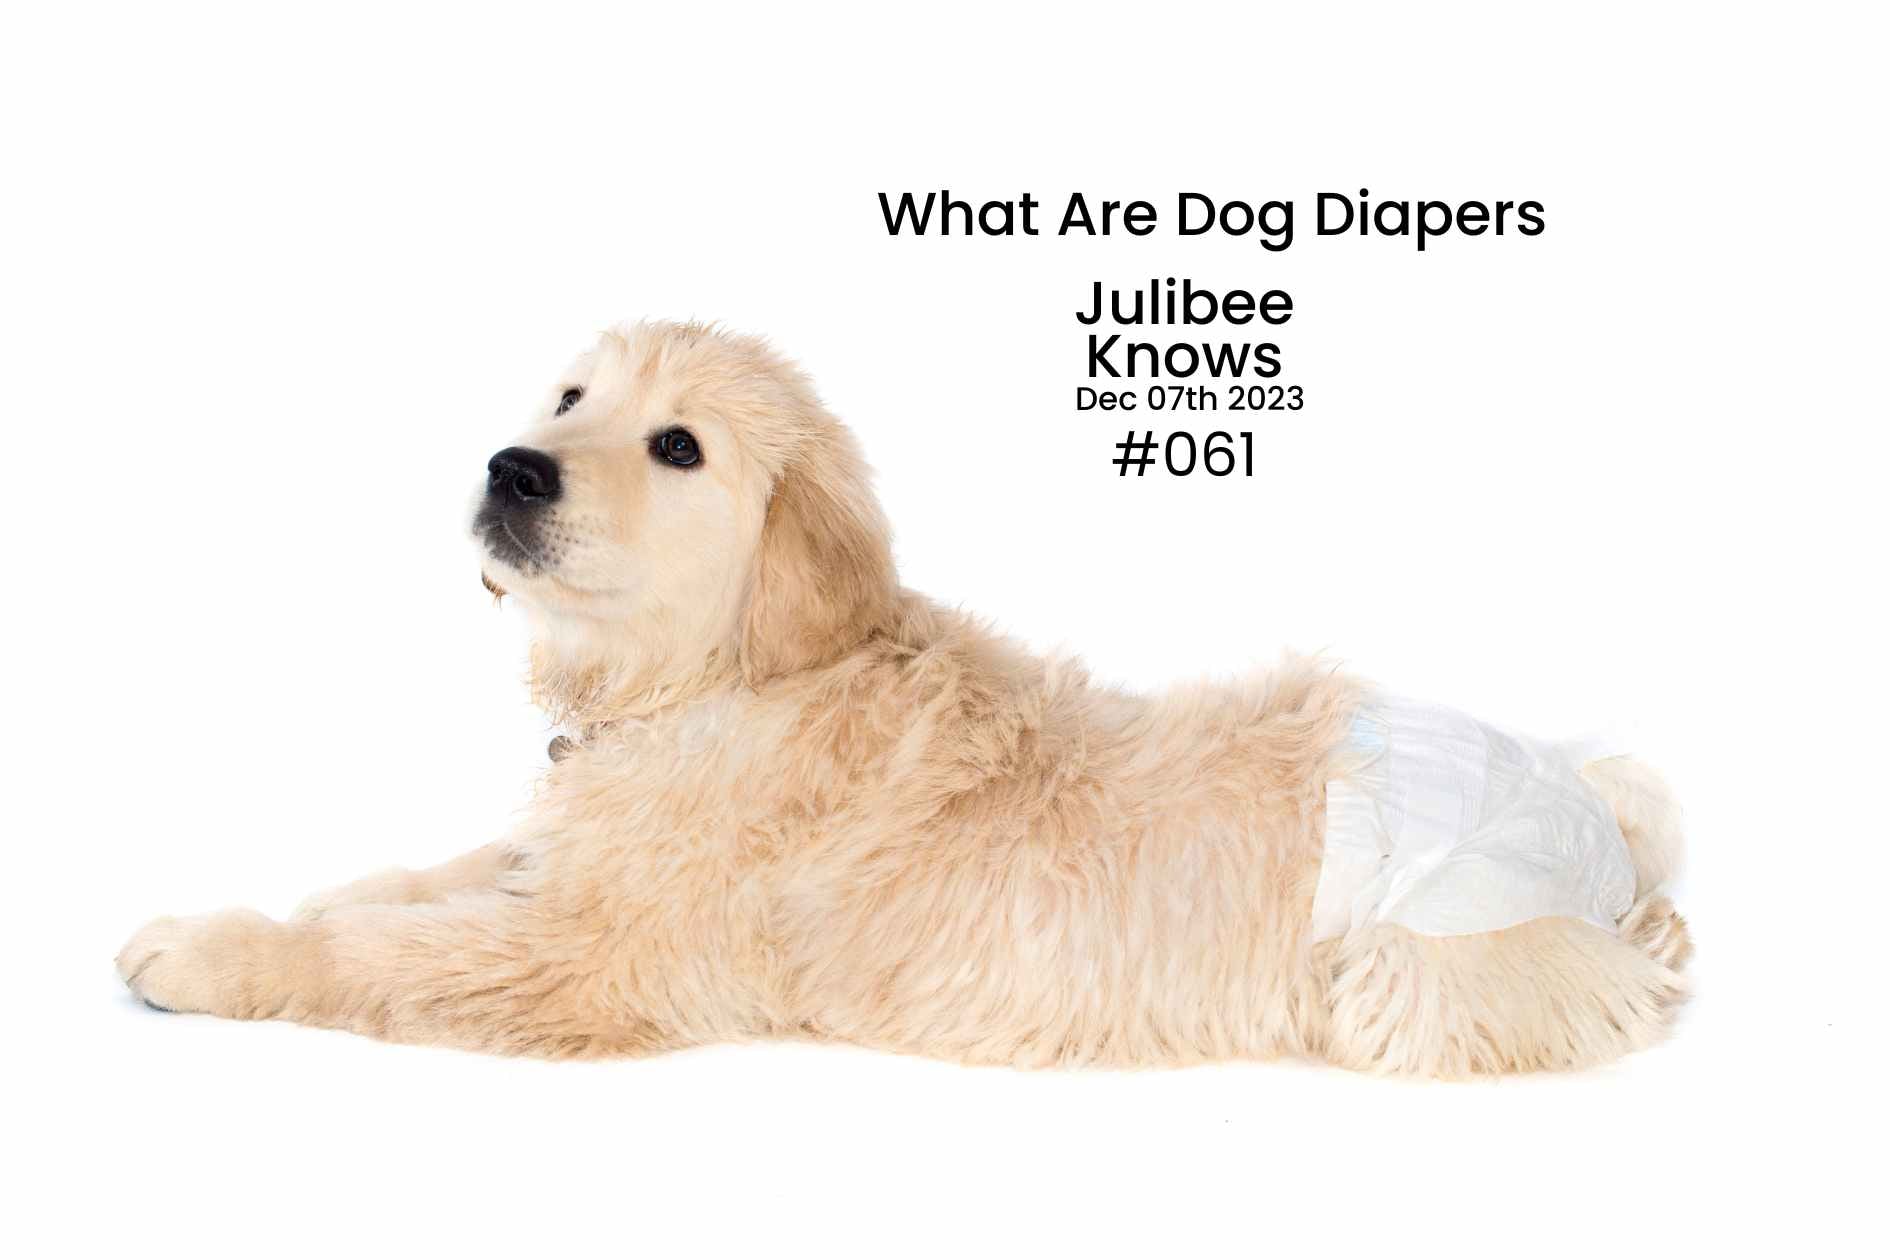 What Are Dog Diapers, and Does Your Dog Need Them?